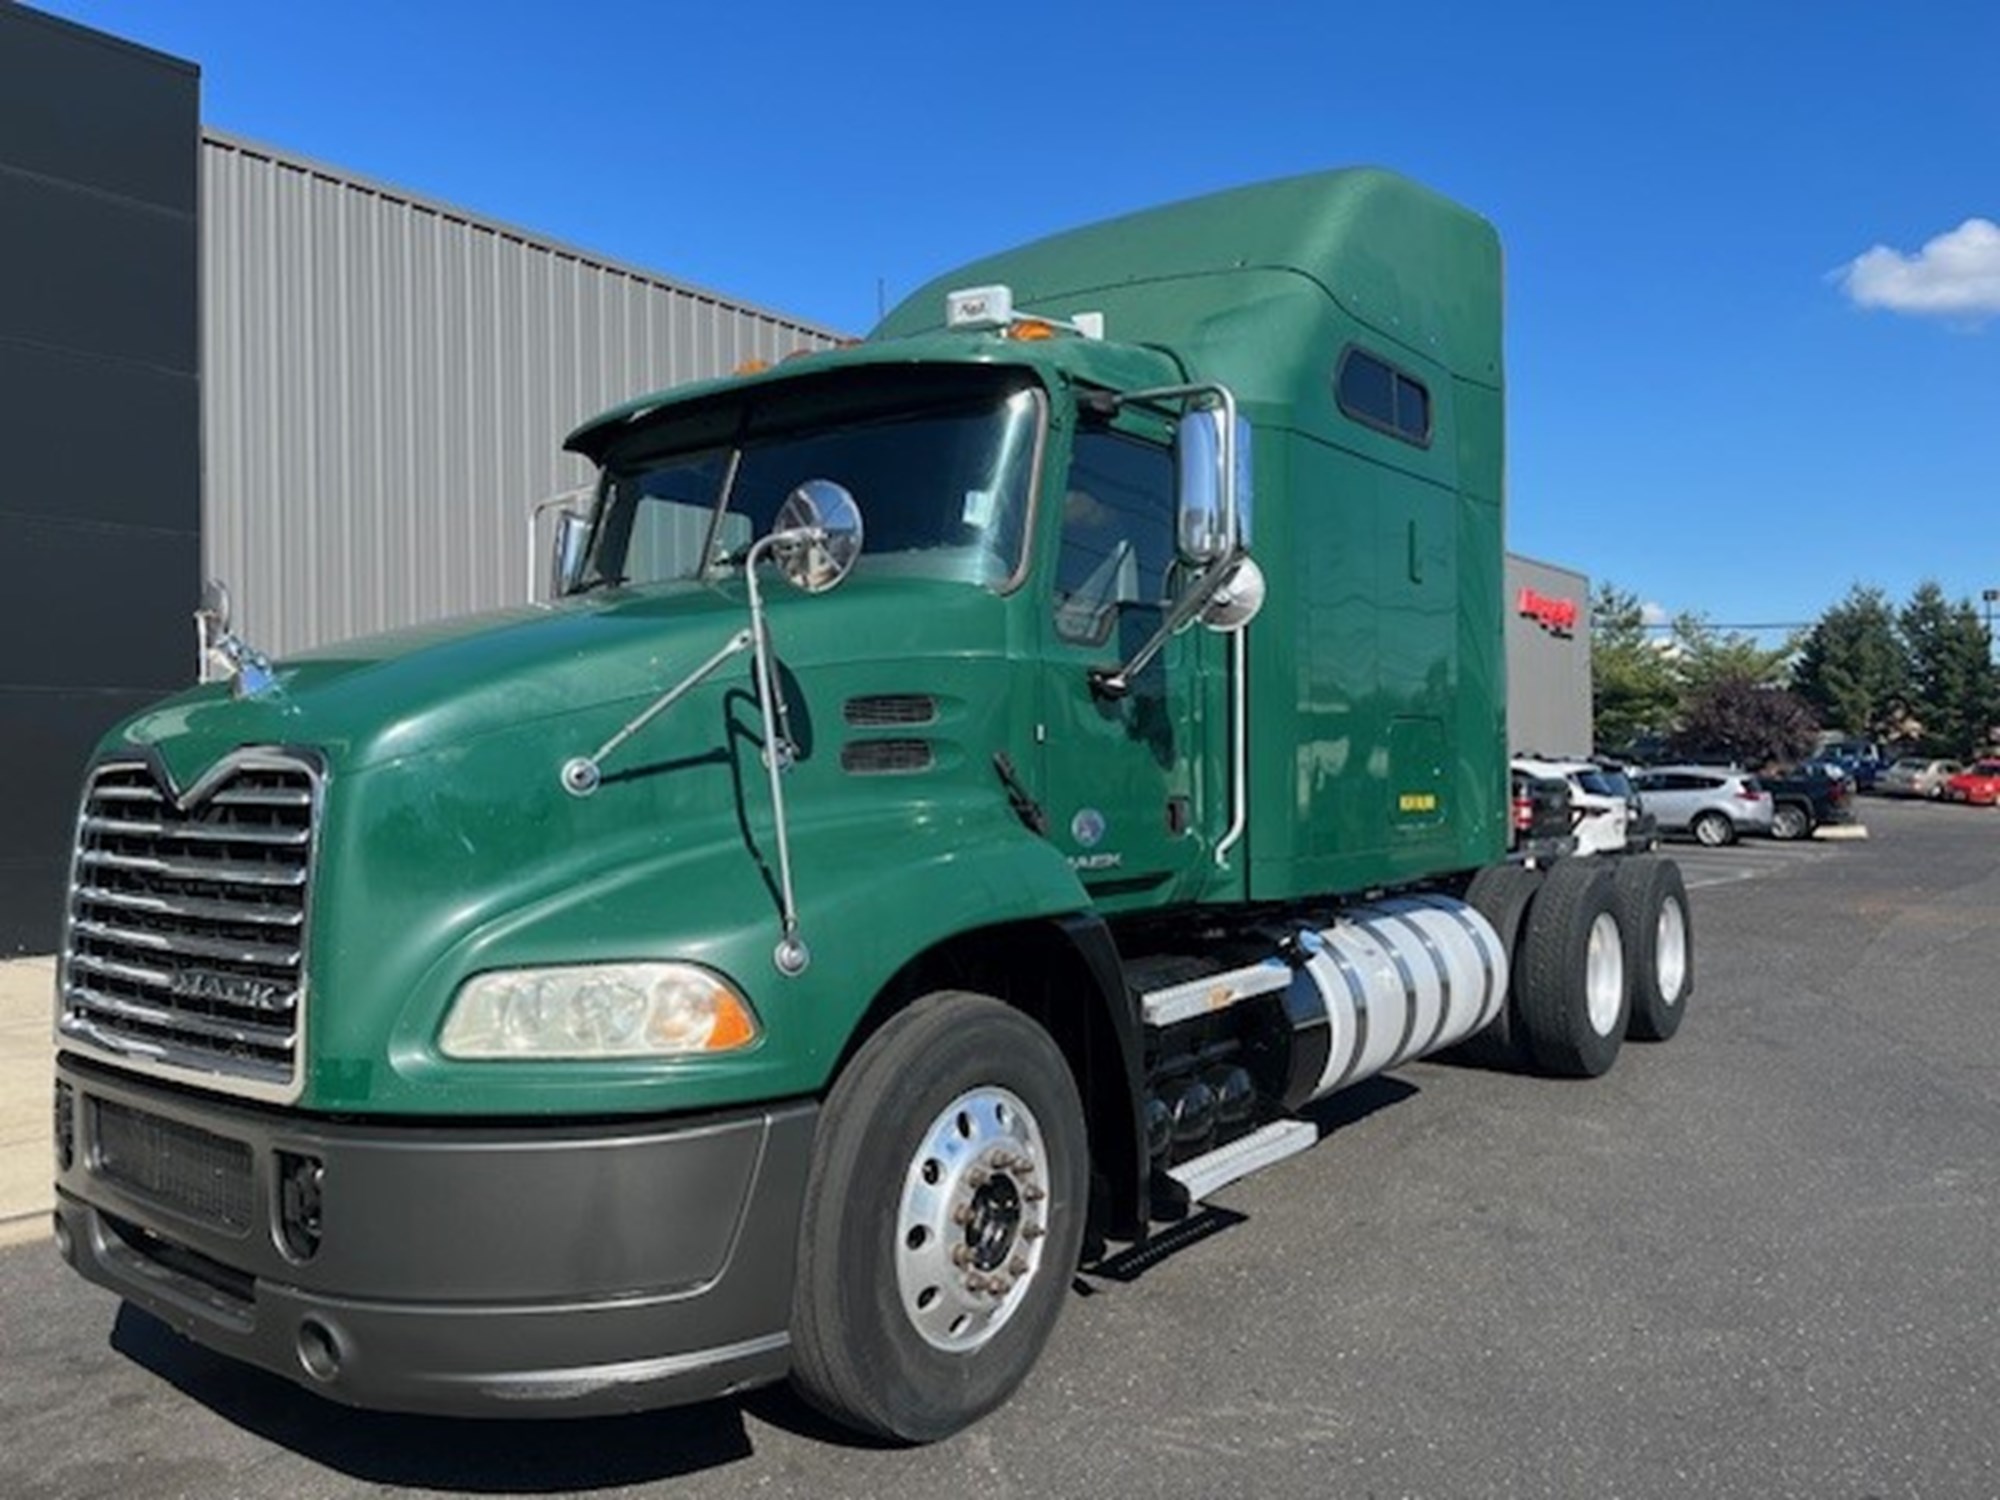 Used Truck Inventory - 1001434 01 - 55